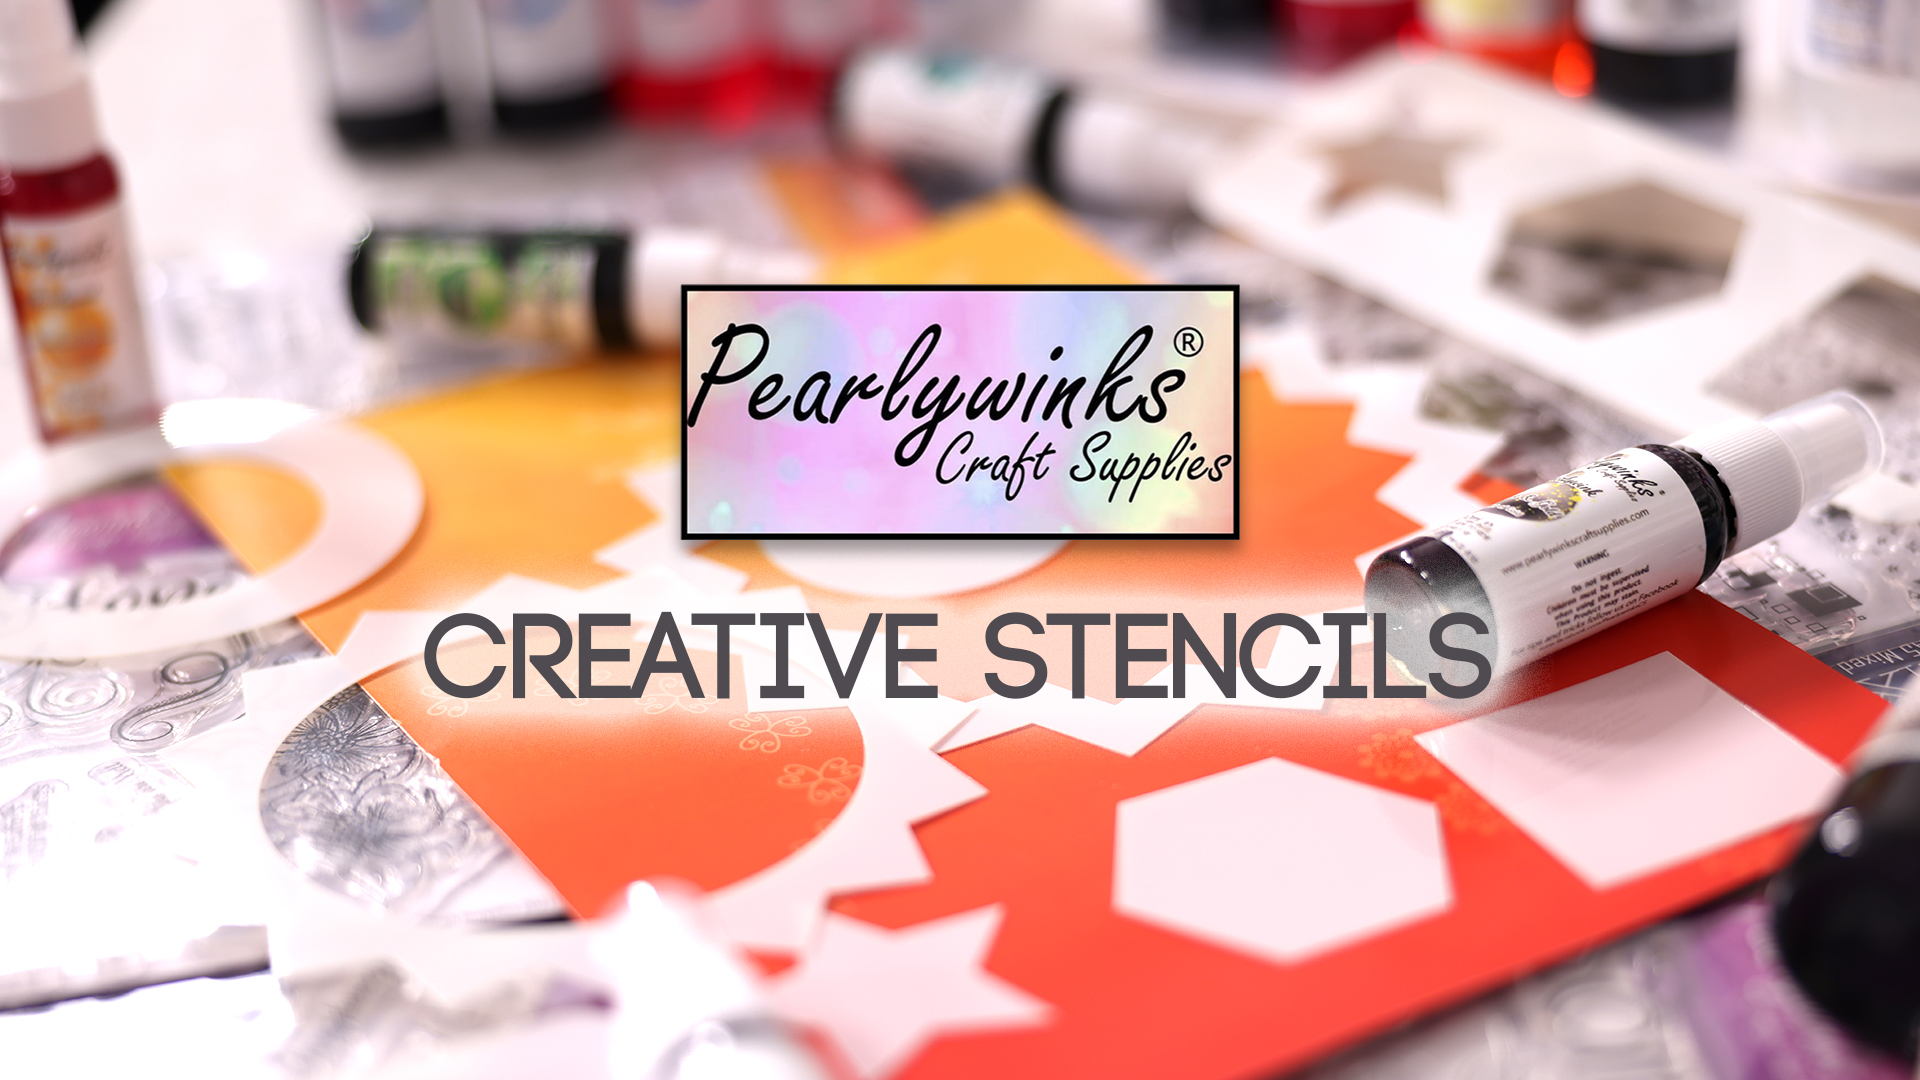 catch-up-with-pearlywinks-creative-stencils-launch-in-the-htcn-studio-broadcast-21st-jan-22